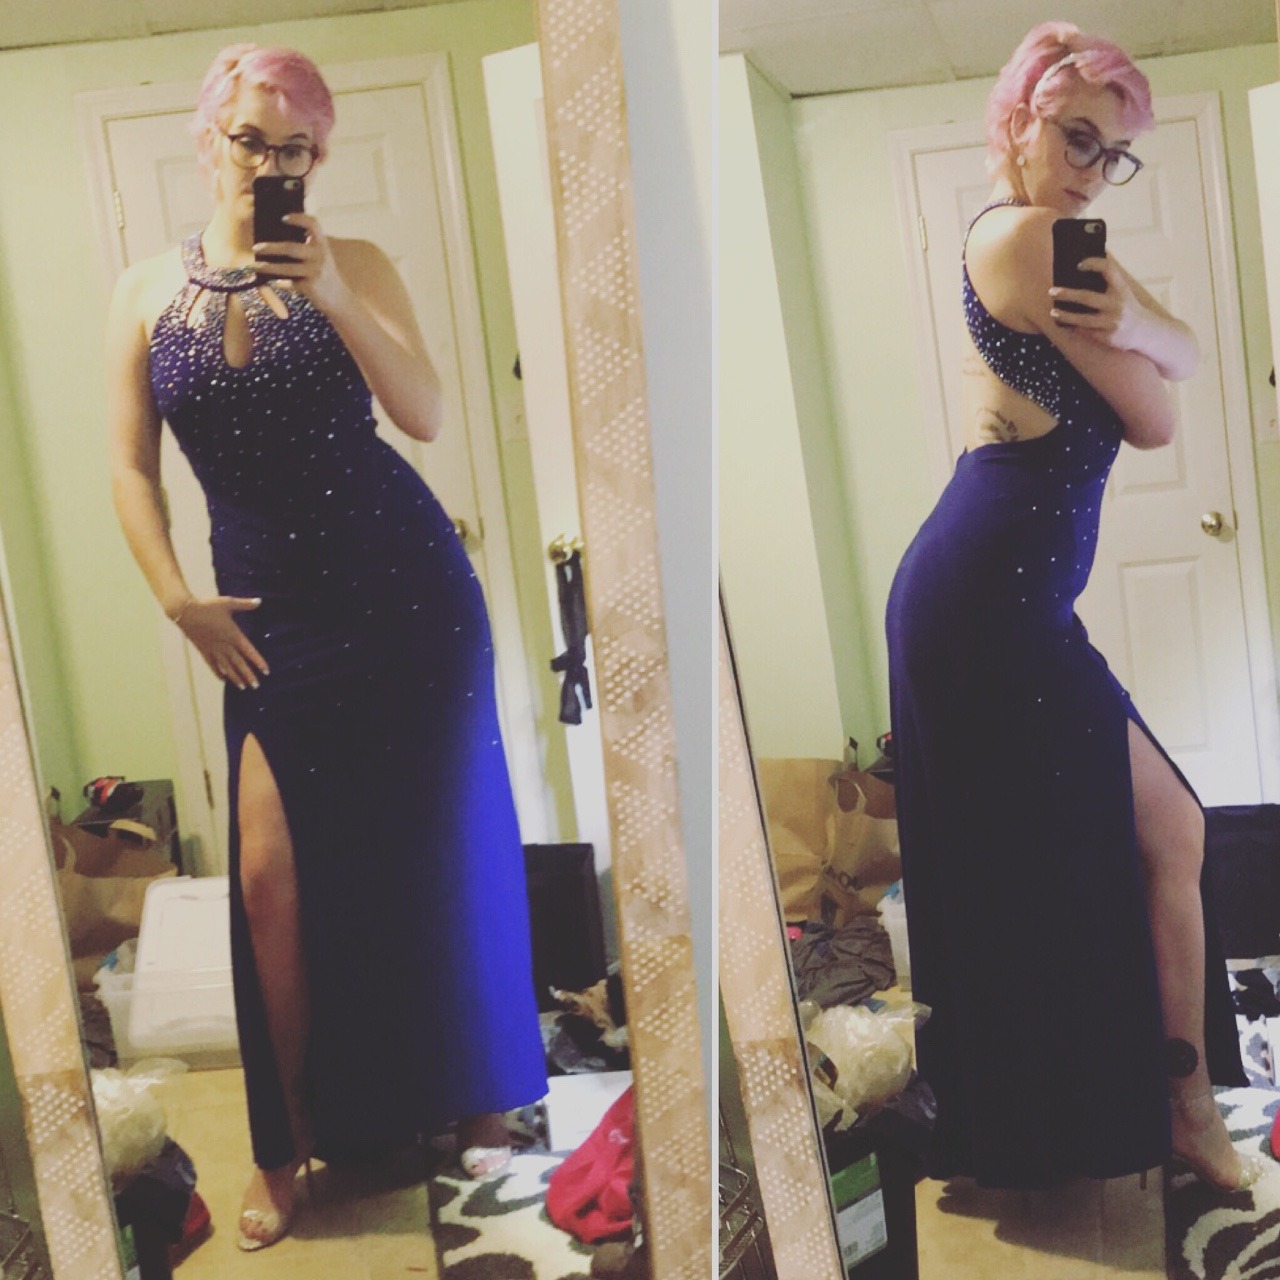 Bitch, it’s like I’m cosplaying the god damn Tardis in this dress. Should I shoot